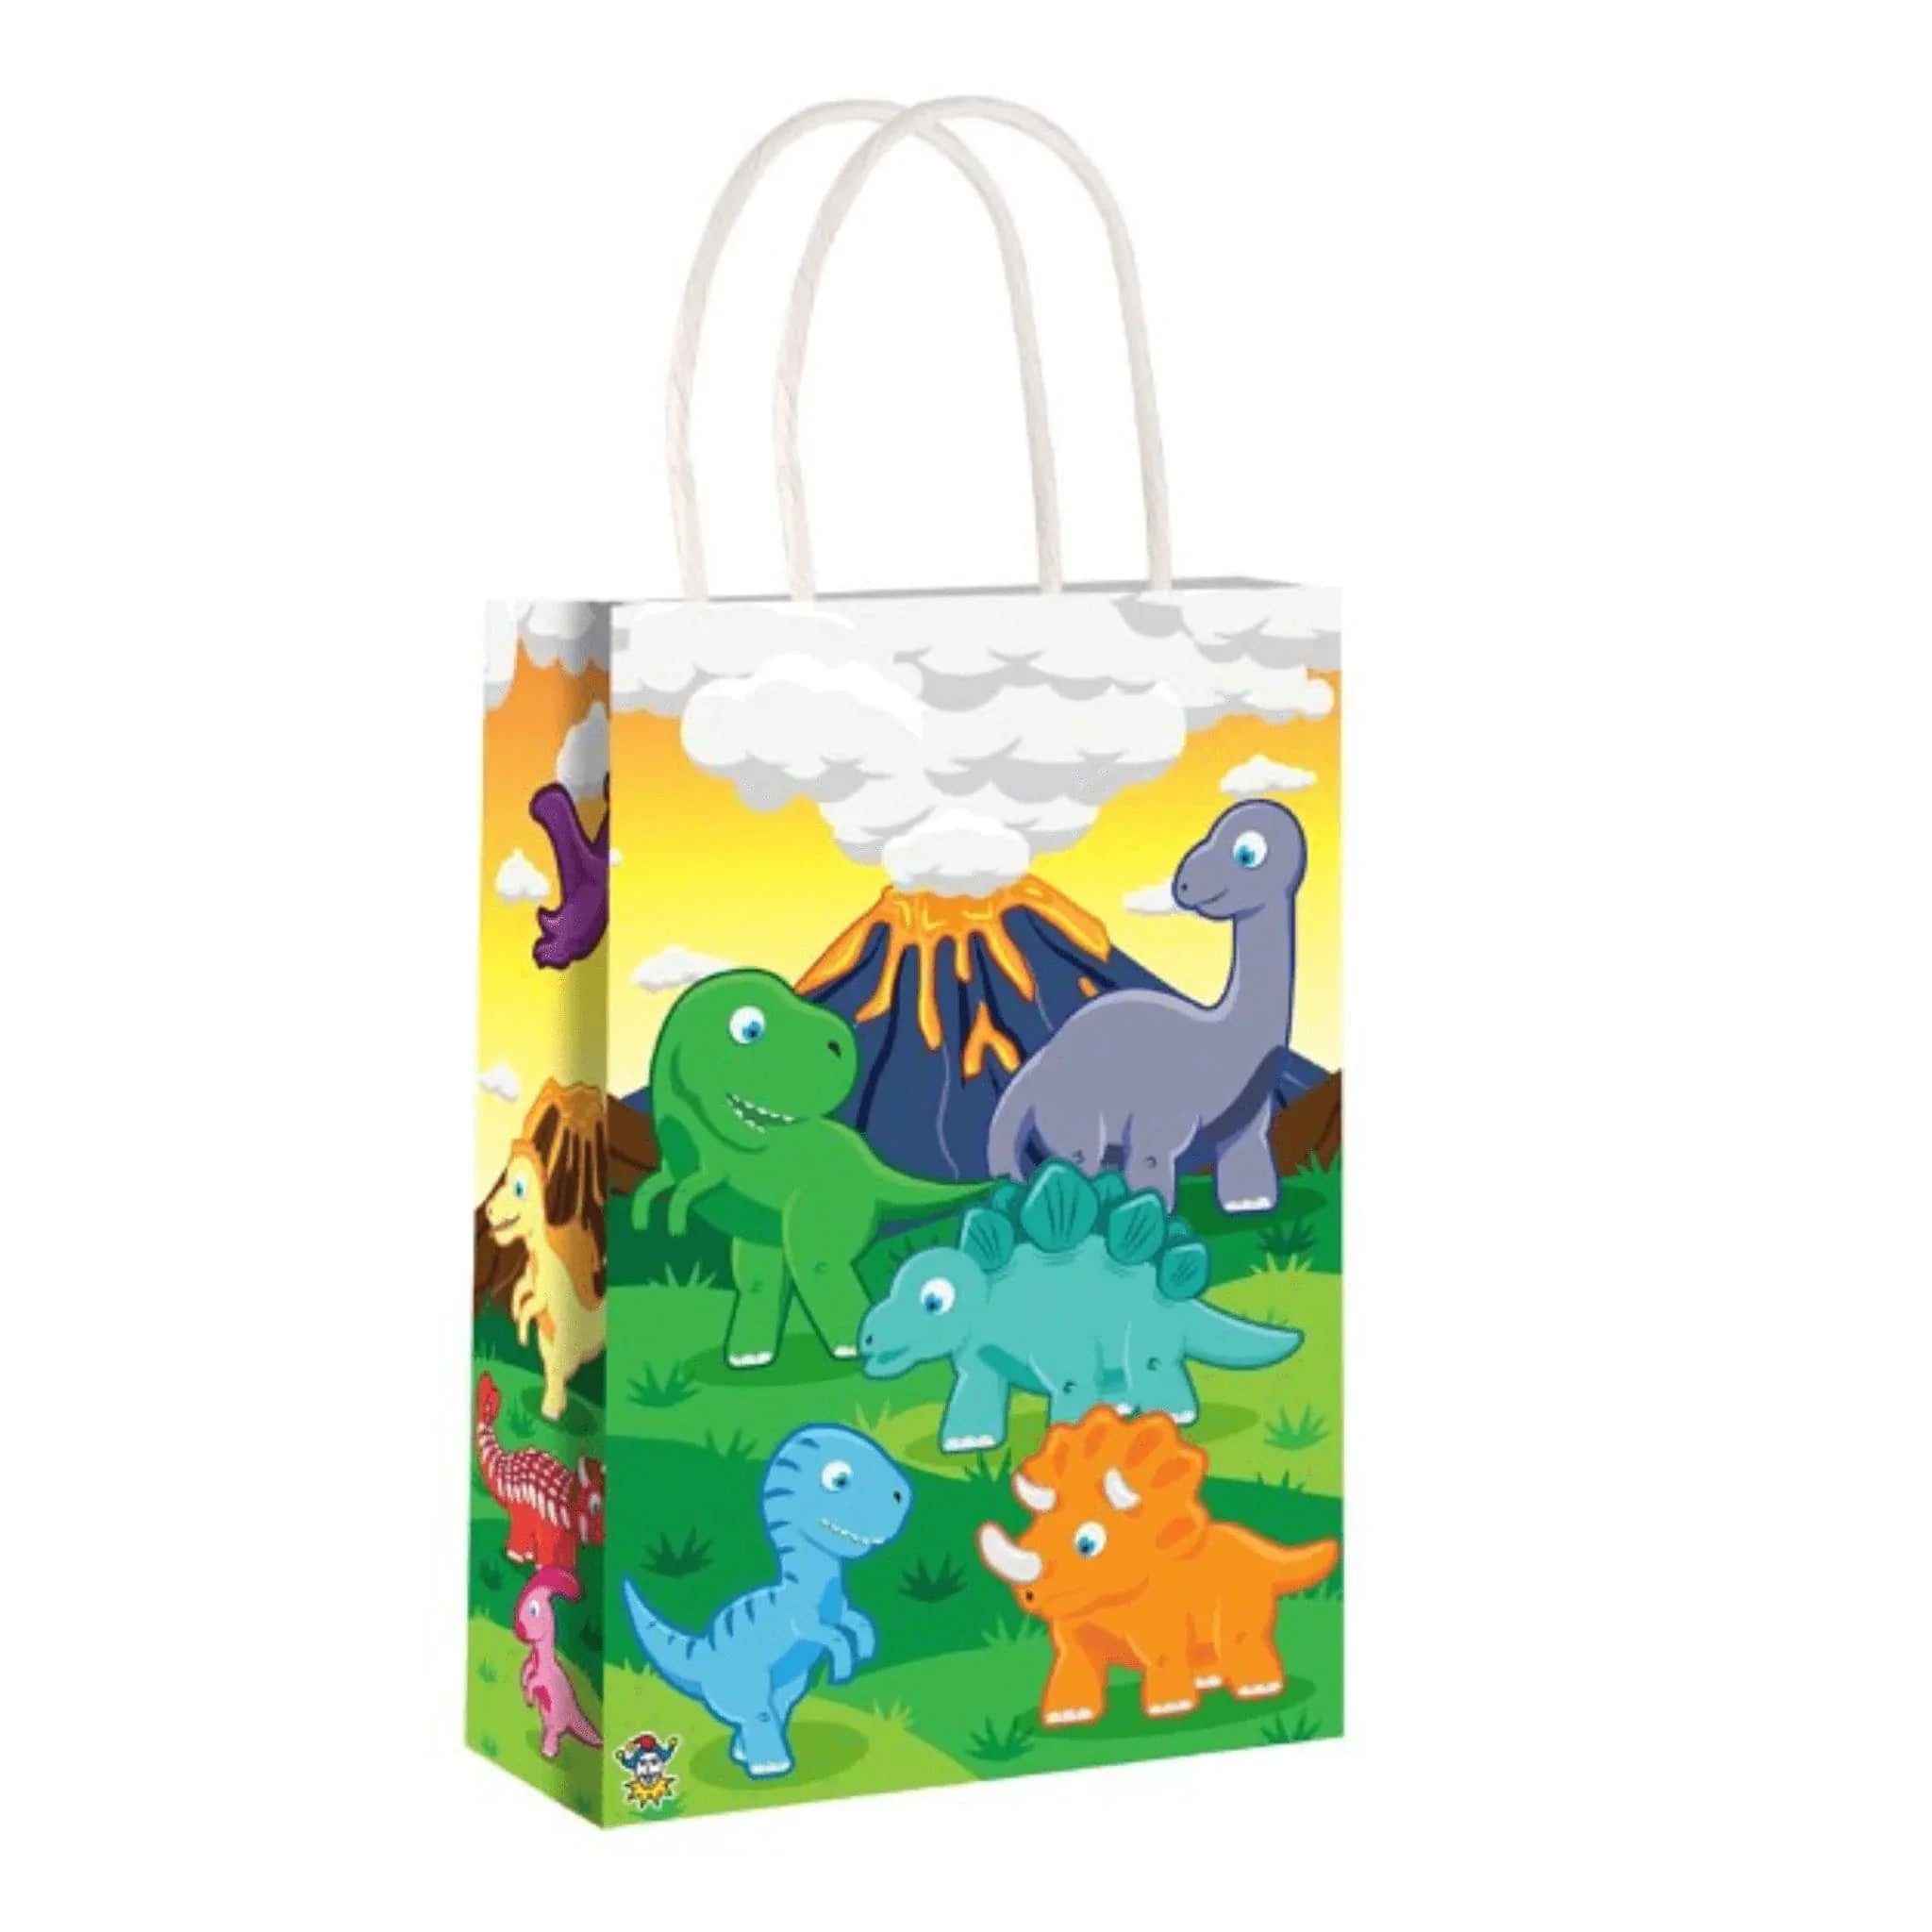 Dinosaur Party Bags - Kids Party Craft